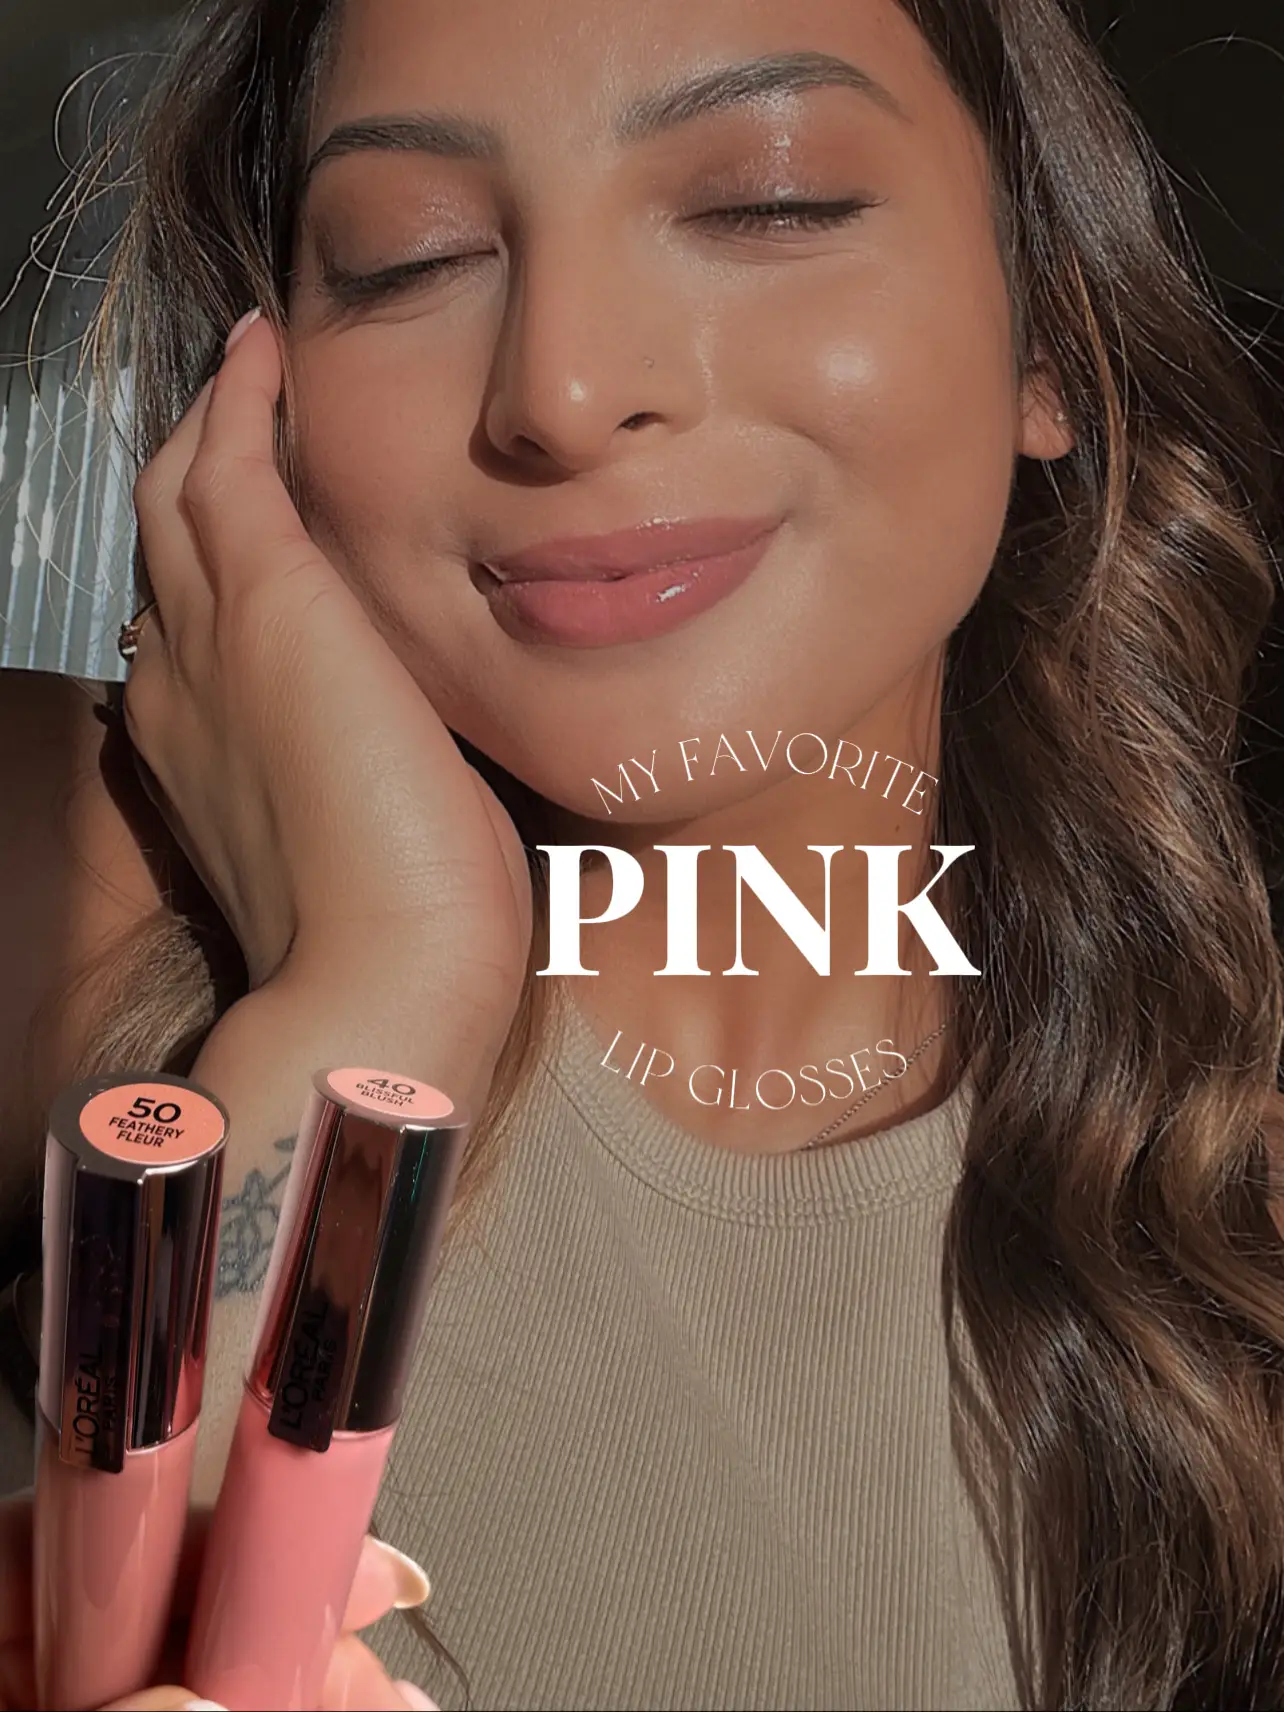 My favorite PINK Lip Gloss 💗, Gallery posted by Daisy Vrabac